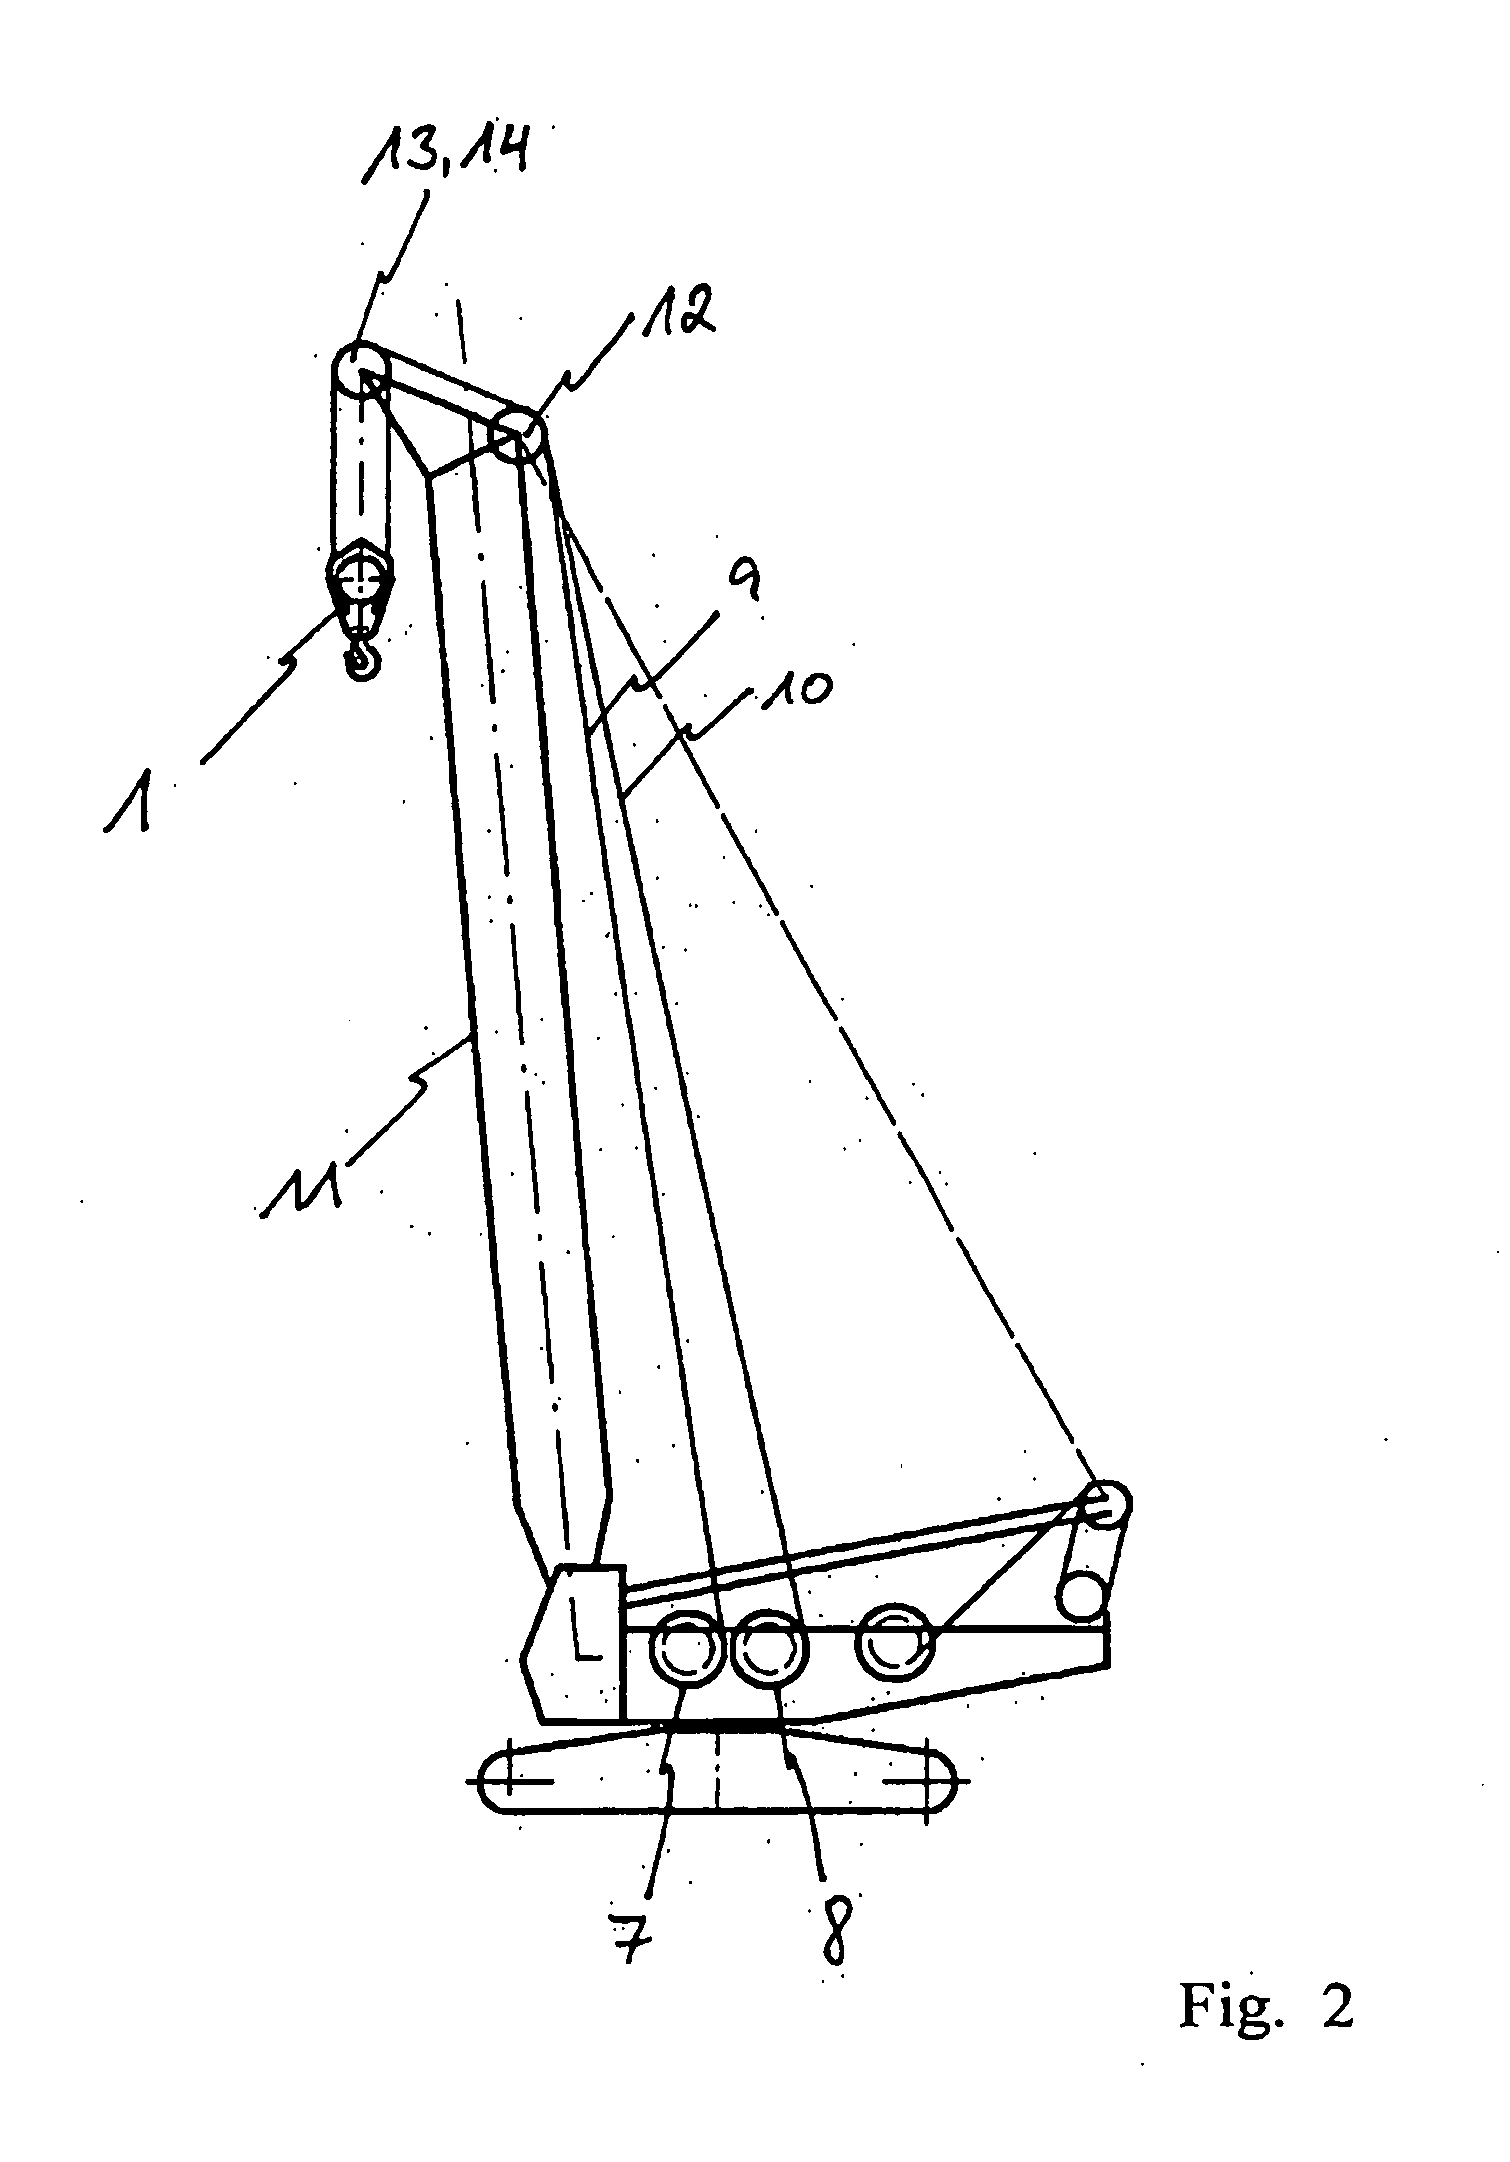 Hoisting-Cable Drive Comprising a Single Bottom-Hook Block and Two Winches